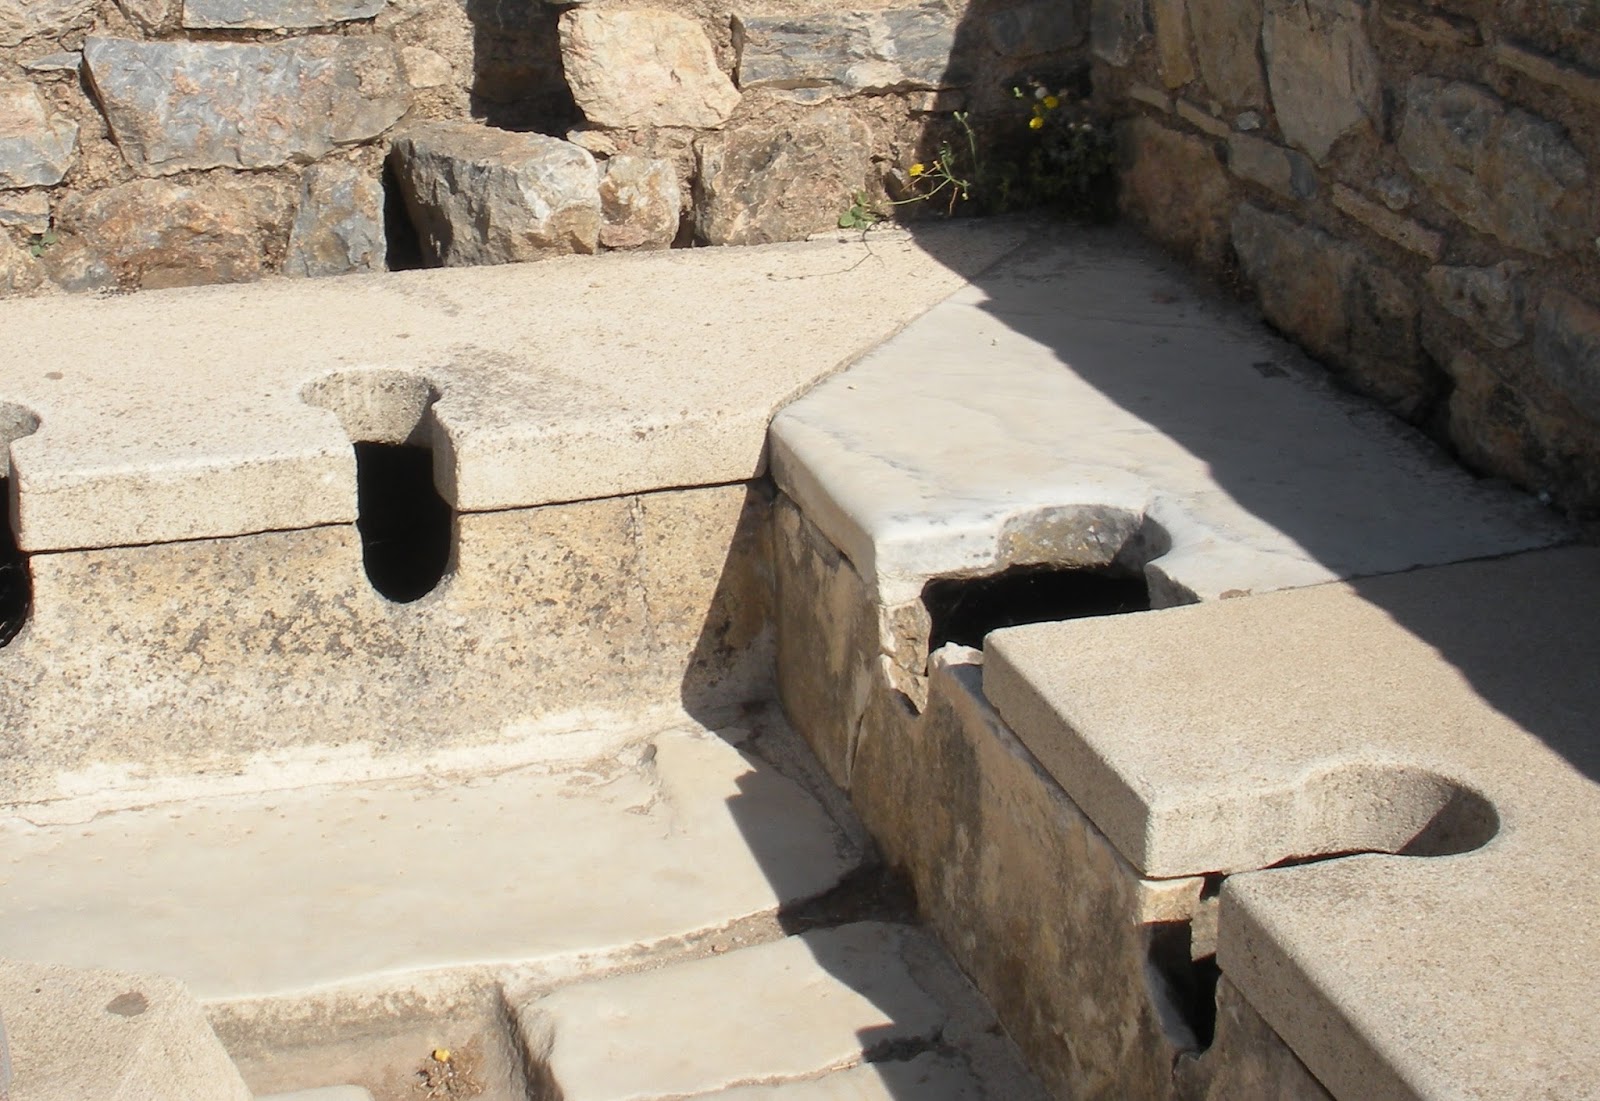 The Indus Valley Toilet